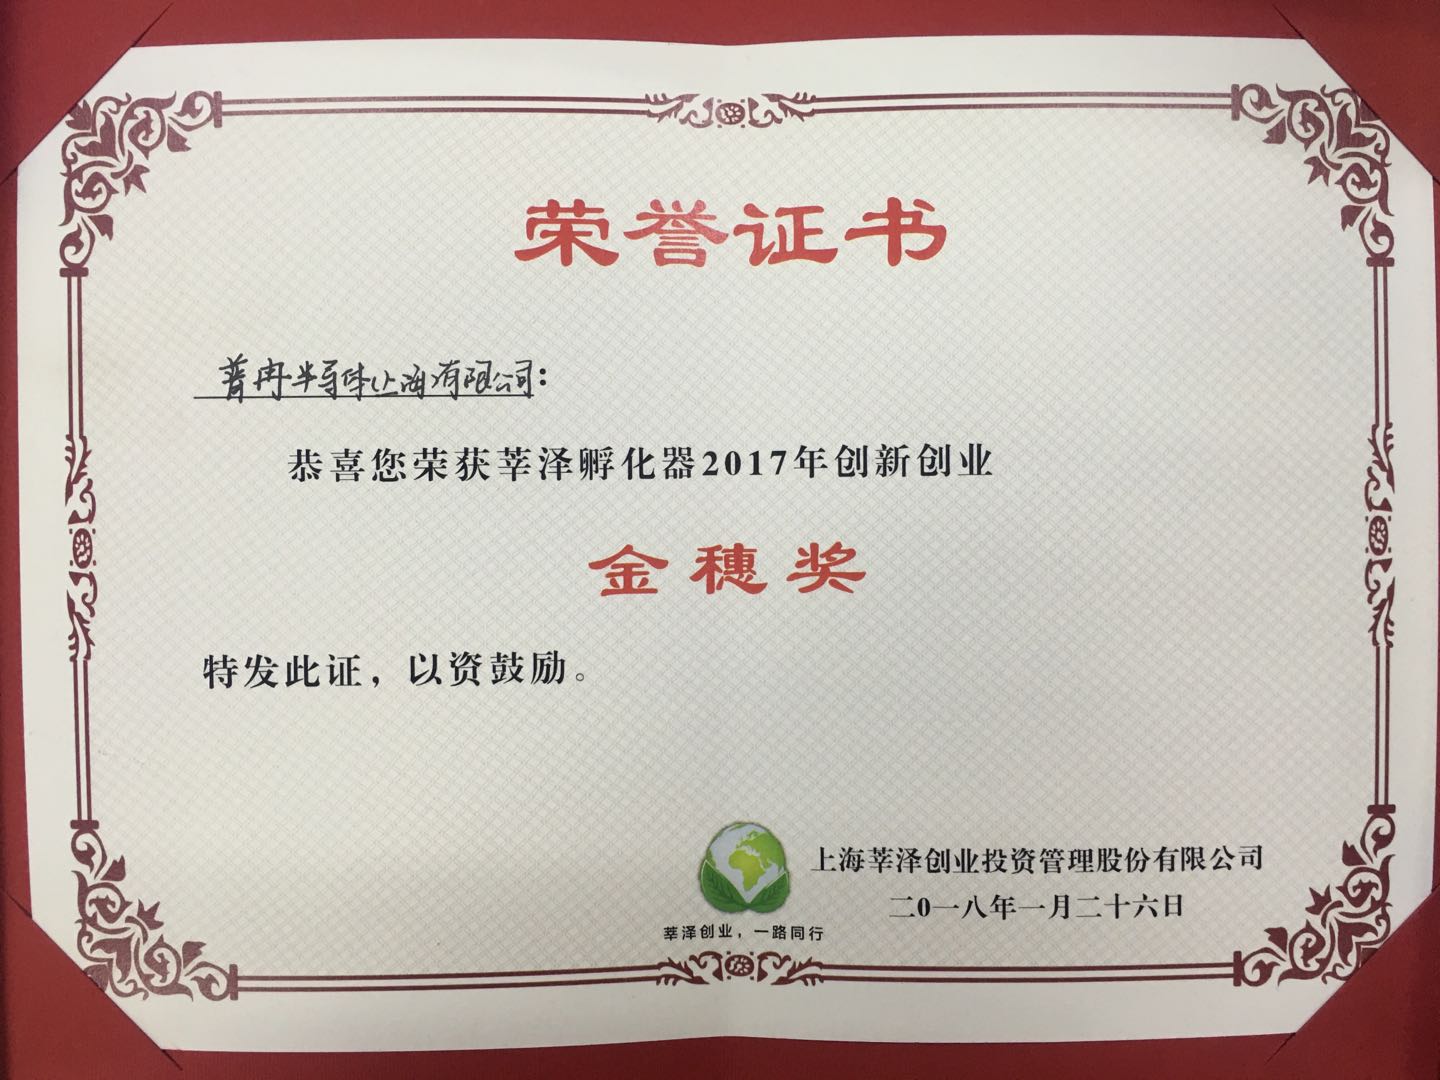 Awarded the Innovation Enterprise of Xinze Incubator in 2017